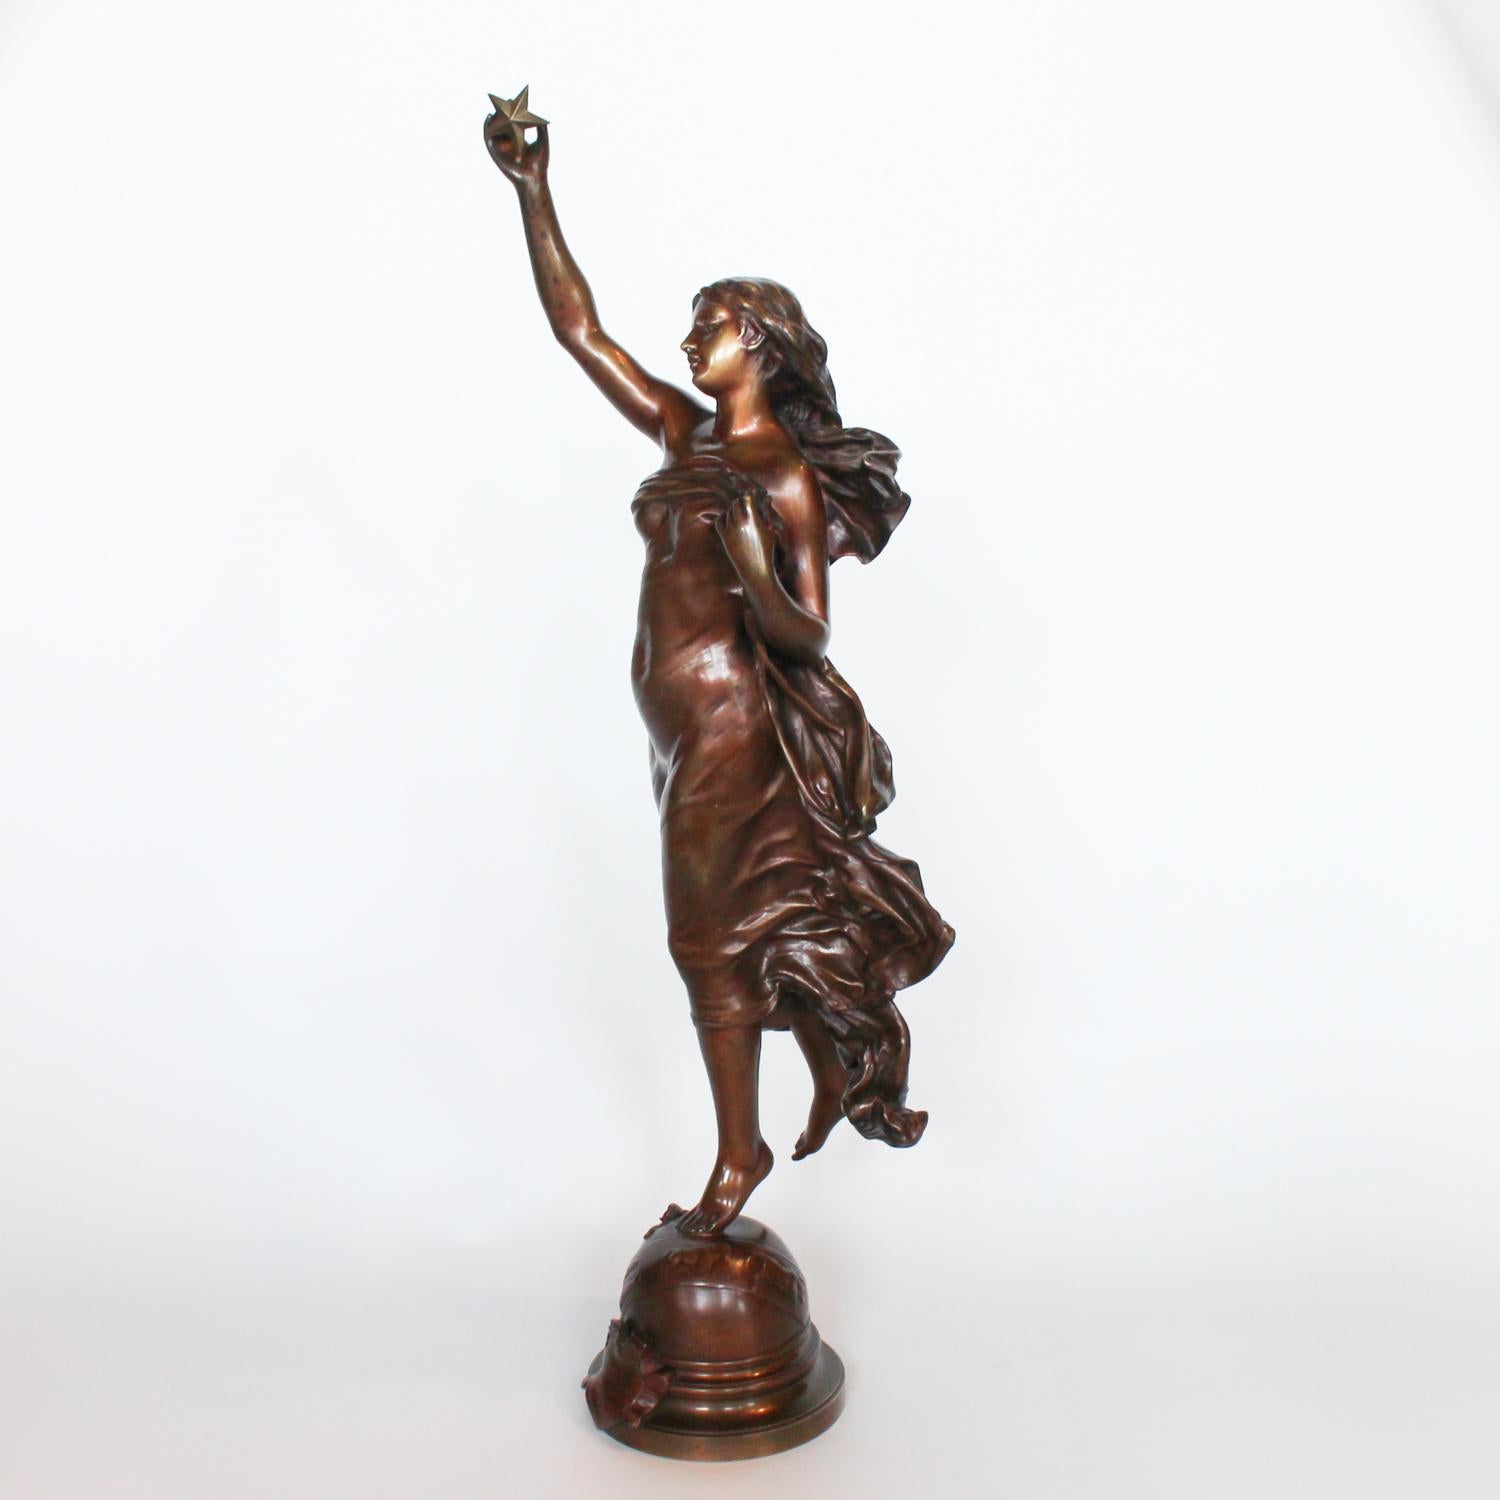 L'Etoile du Matin, an Art Nouveau patinated bronze sculpture of a mythological lady in flowing robes holding aloft a star, perched on a globe decorated with symbols of the zodiac and a sprig of roses.

Signed Gaudez to cast, with applied shield to